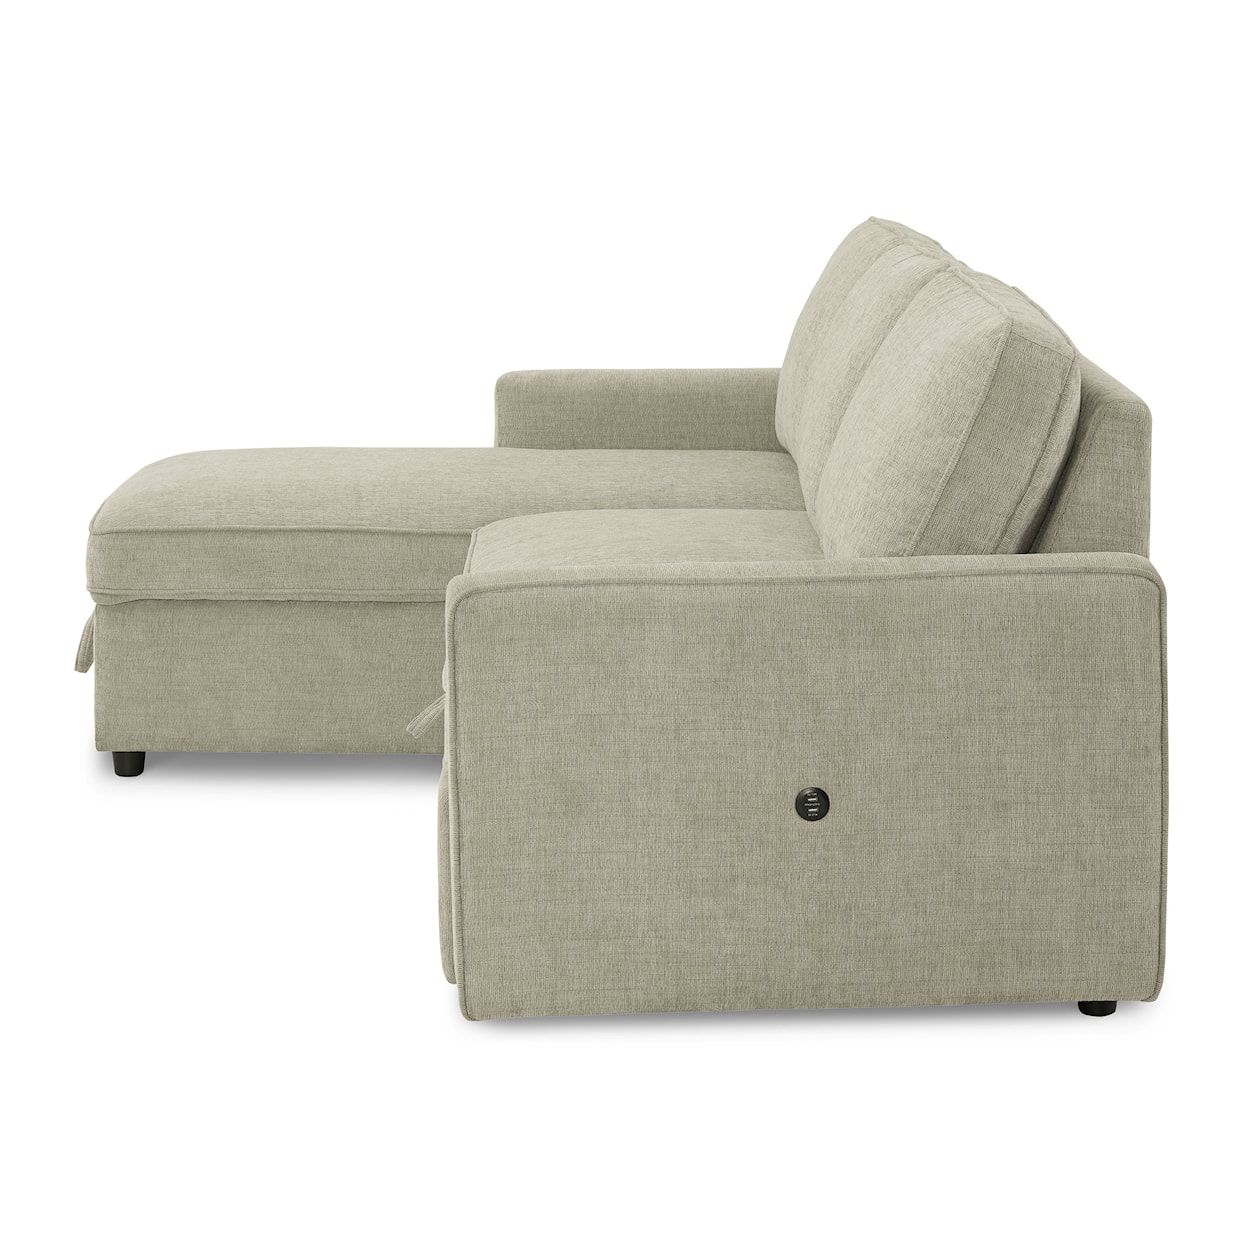 Signature Design by Ashley Kerle Sectional with Storage and Pop Up Bed